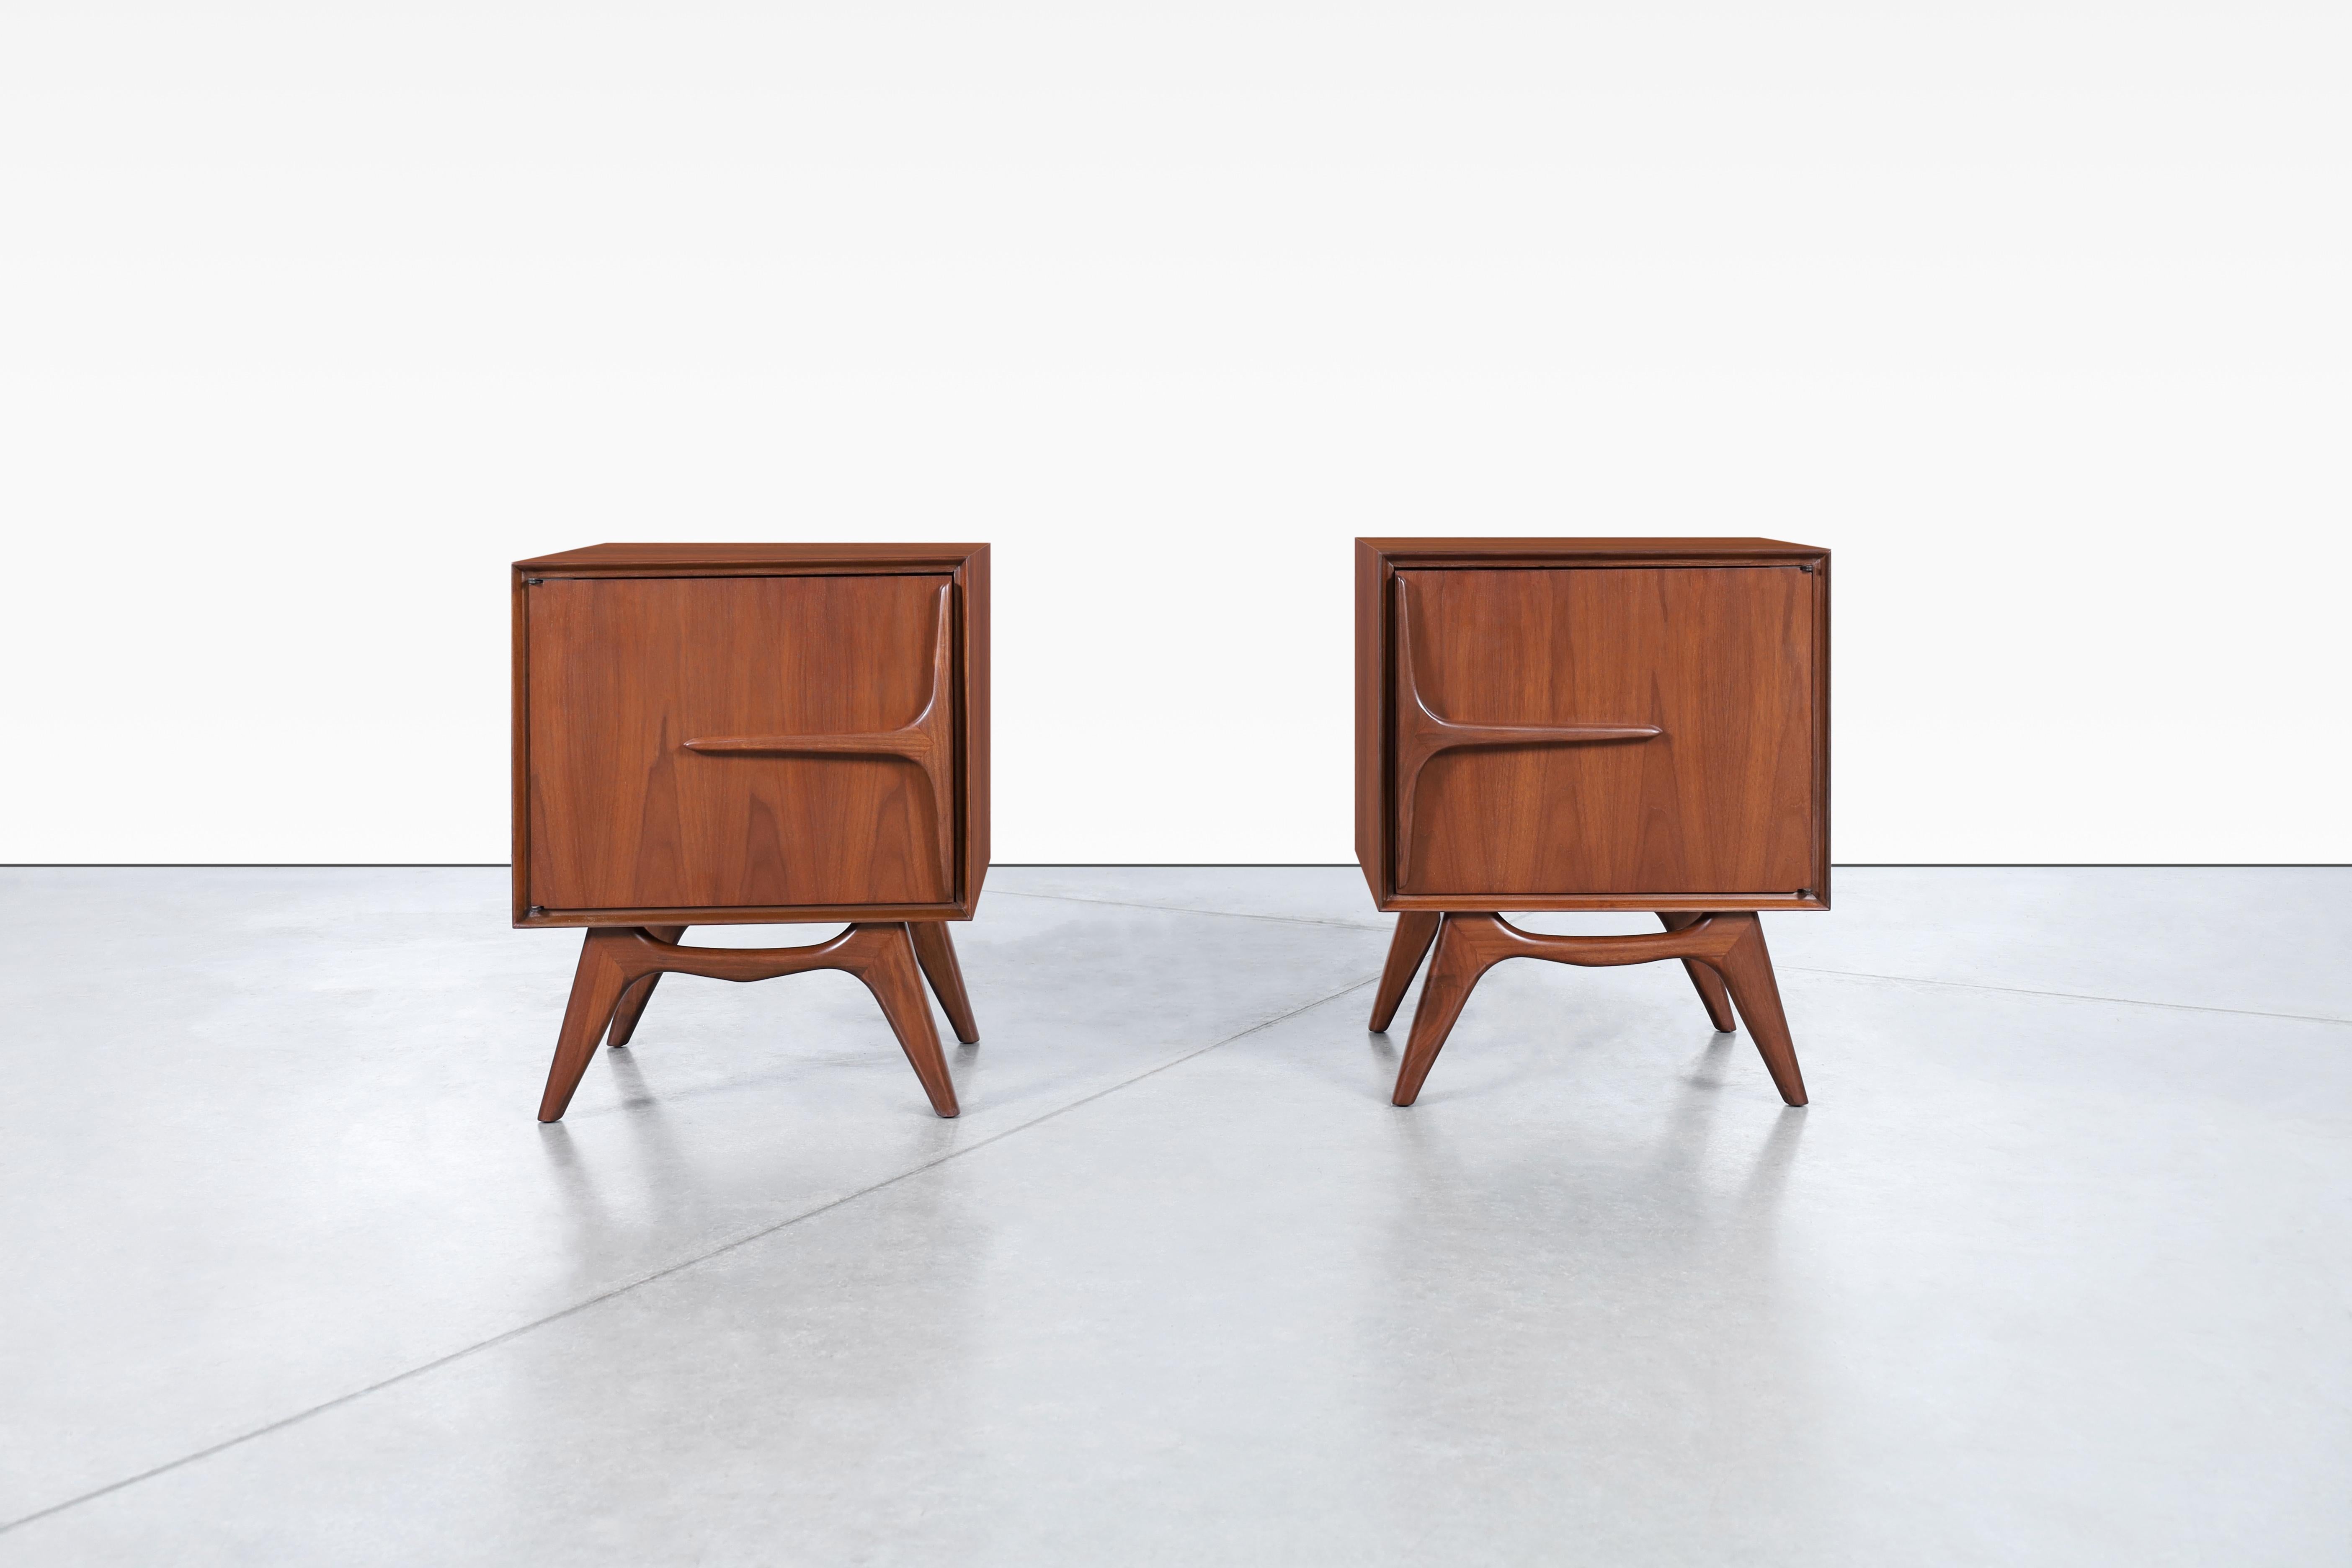 Beautiful mid-century modern walnut sculptural nightstands, produced in the United States, circa 1950s. These nightstands are truly exceptional pieces, handcrafted from the finest quality walnut wood and boasting a daring design that is sure to